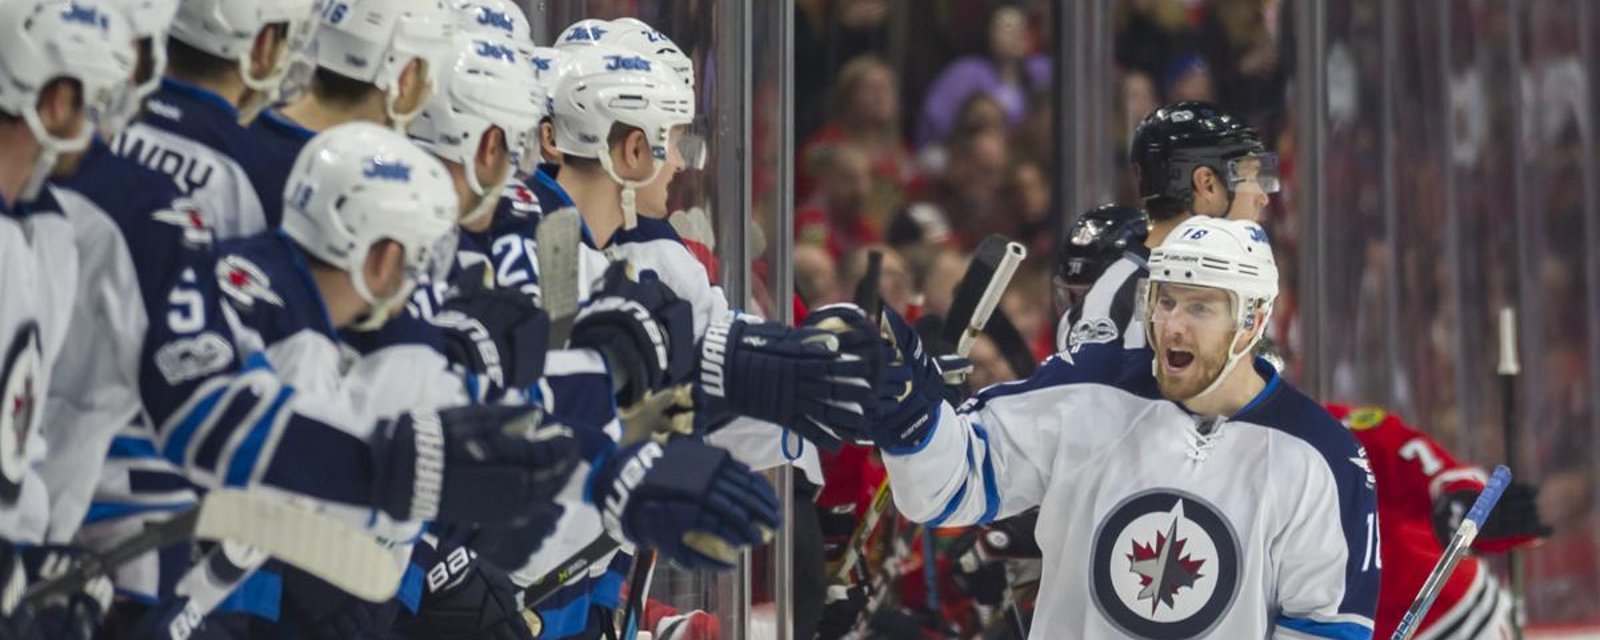 The Winnipeg Jets are the only team to have achieved this offensive perk. 